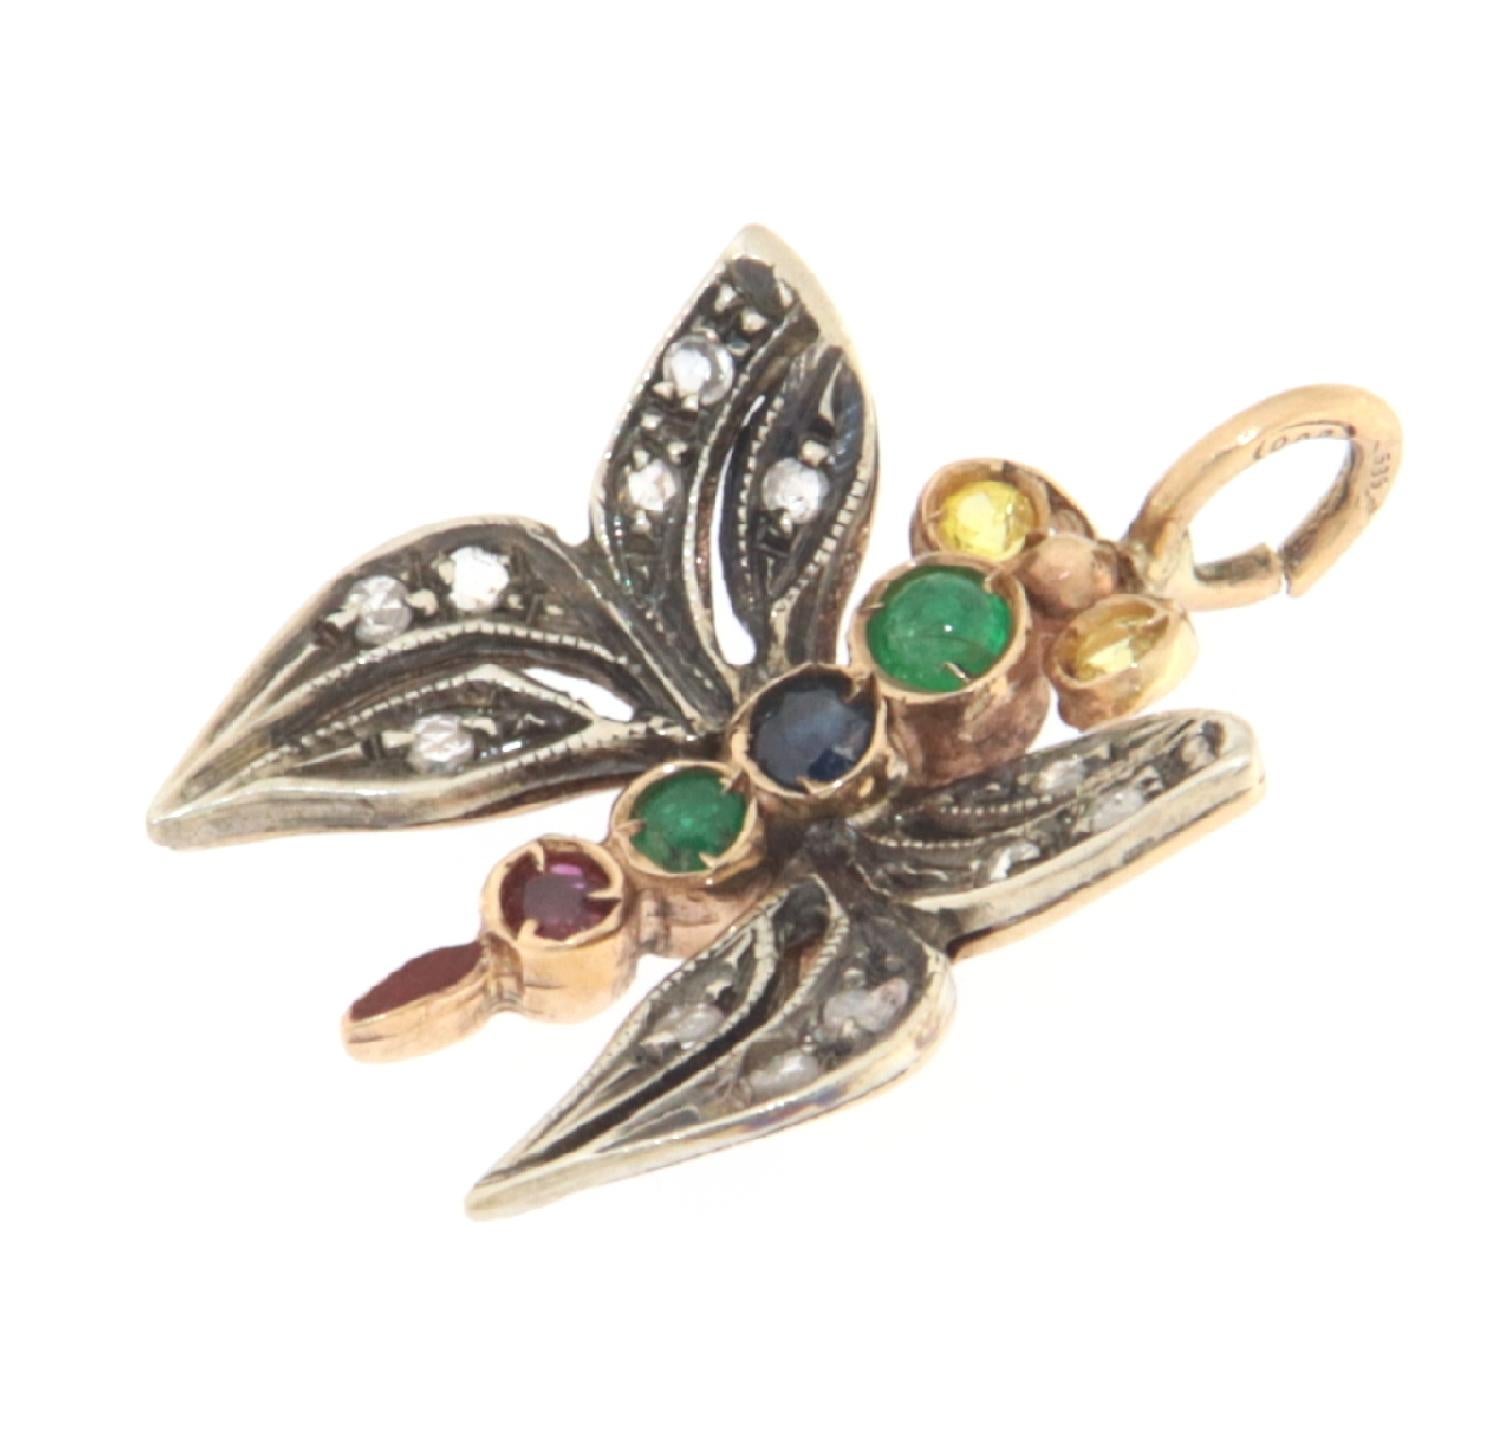 This exceptional butterfly-shaped pendant, beautifully crafted in a blend of 14-karat yellow gold and sterling silver, is a masterpiece of jewelry art that celebrates the intricate beauty and craftsmanship of nature. With a detail-rich design, this